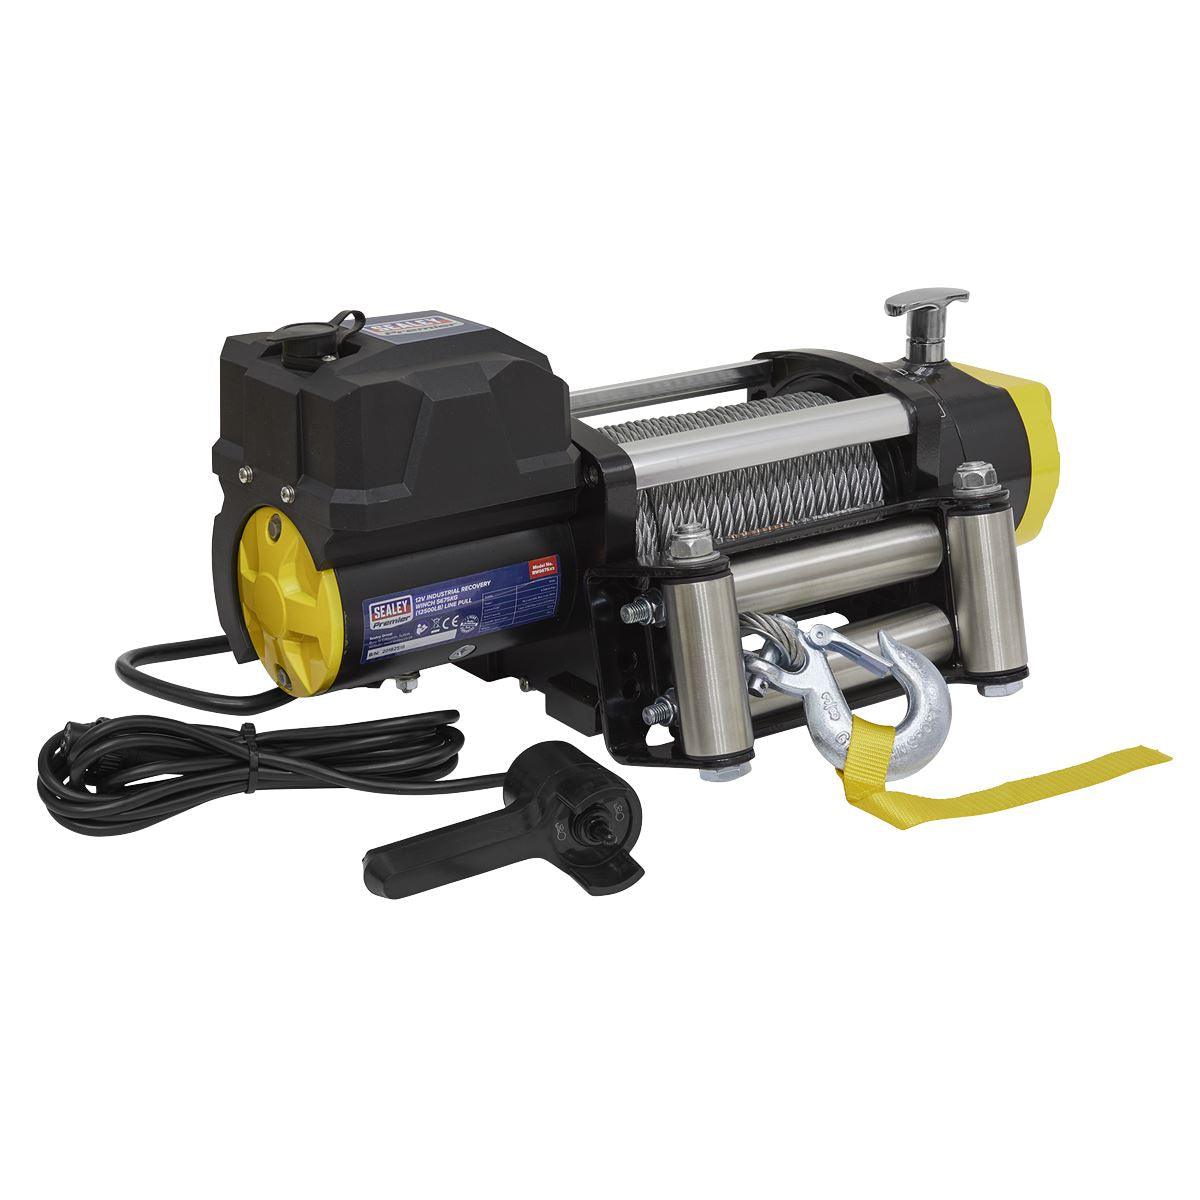 Sealey Premier Recovery Winch 5675kg (12500lb) Line Pull 12V Industrial